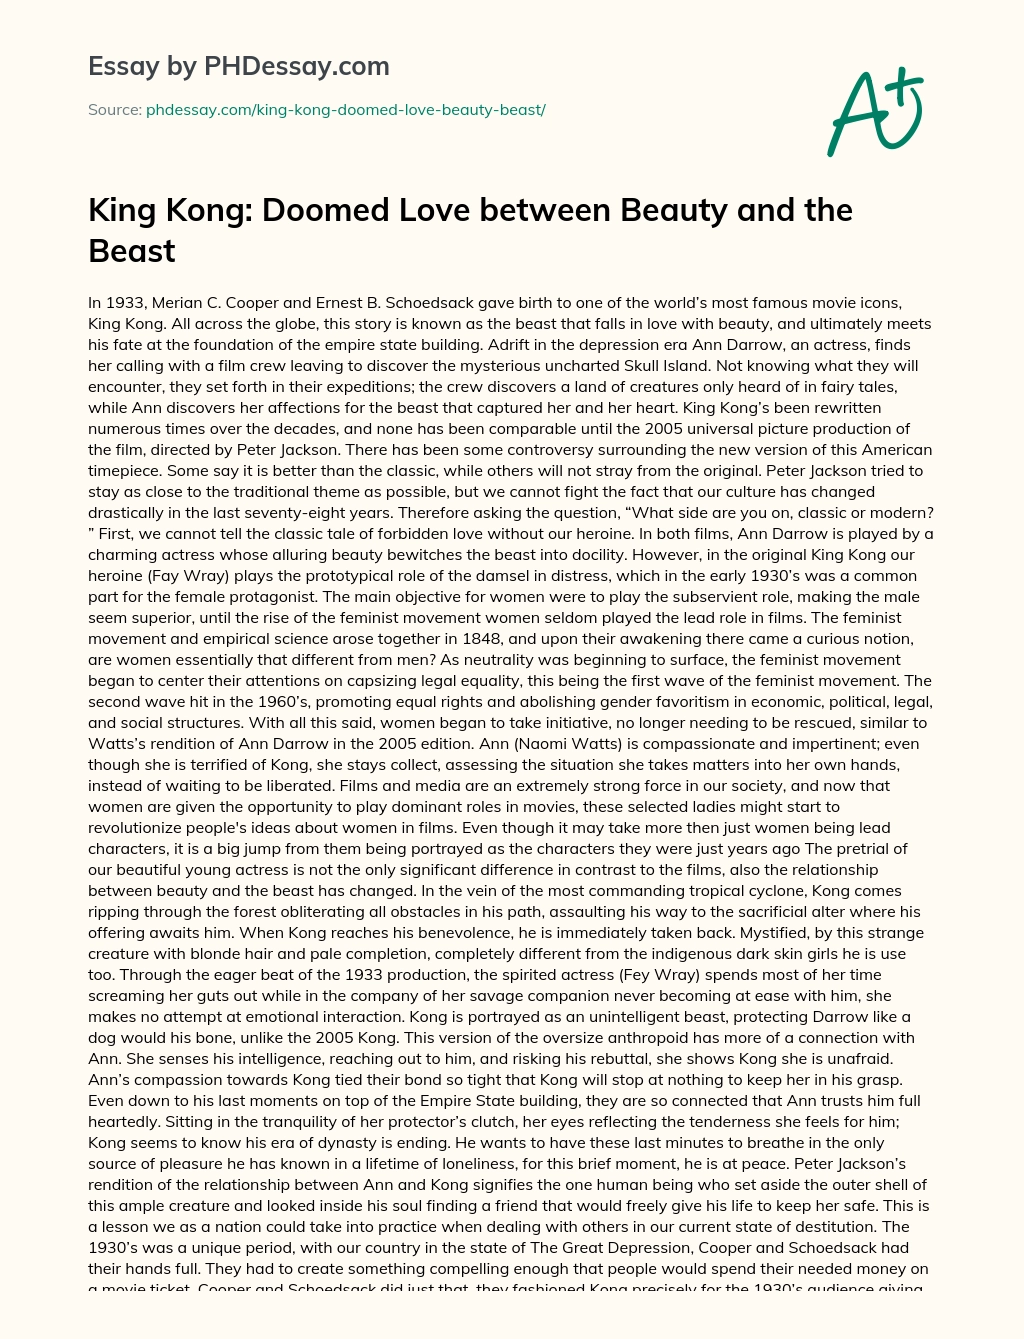 King Kong: Doomed Love between Beauty and the Beast essay